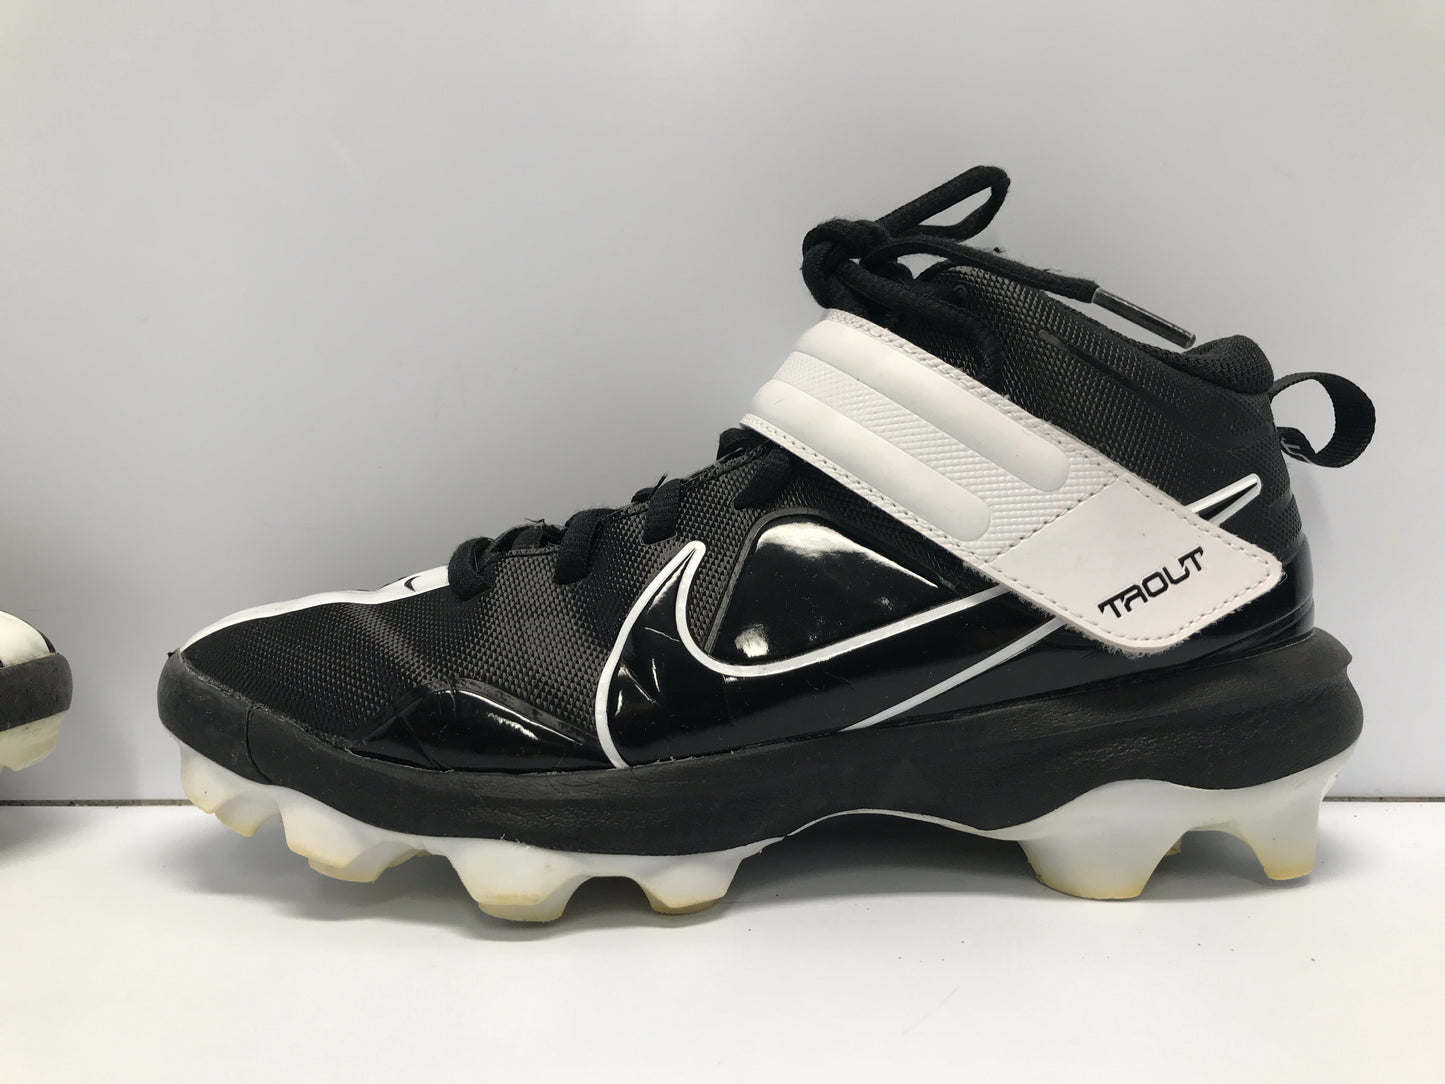 Baseball Shoes Cleats Child Size 5.5 Youth Nike Trout Black White Excellent